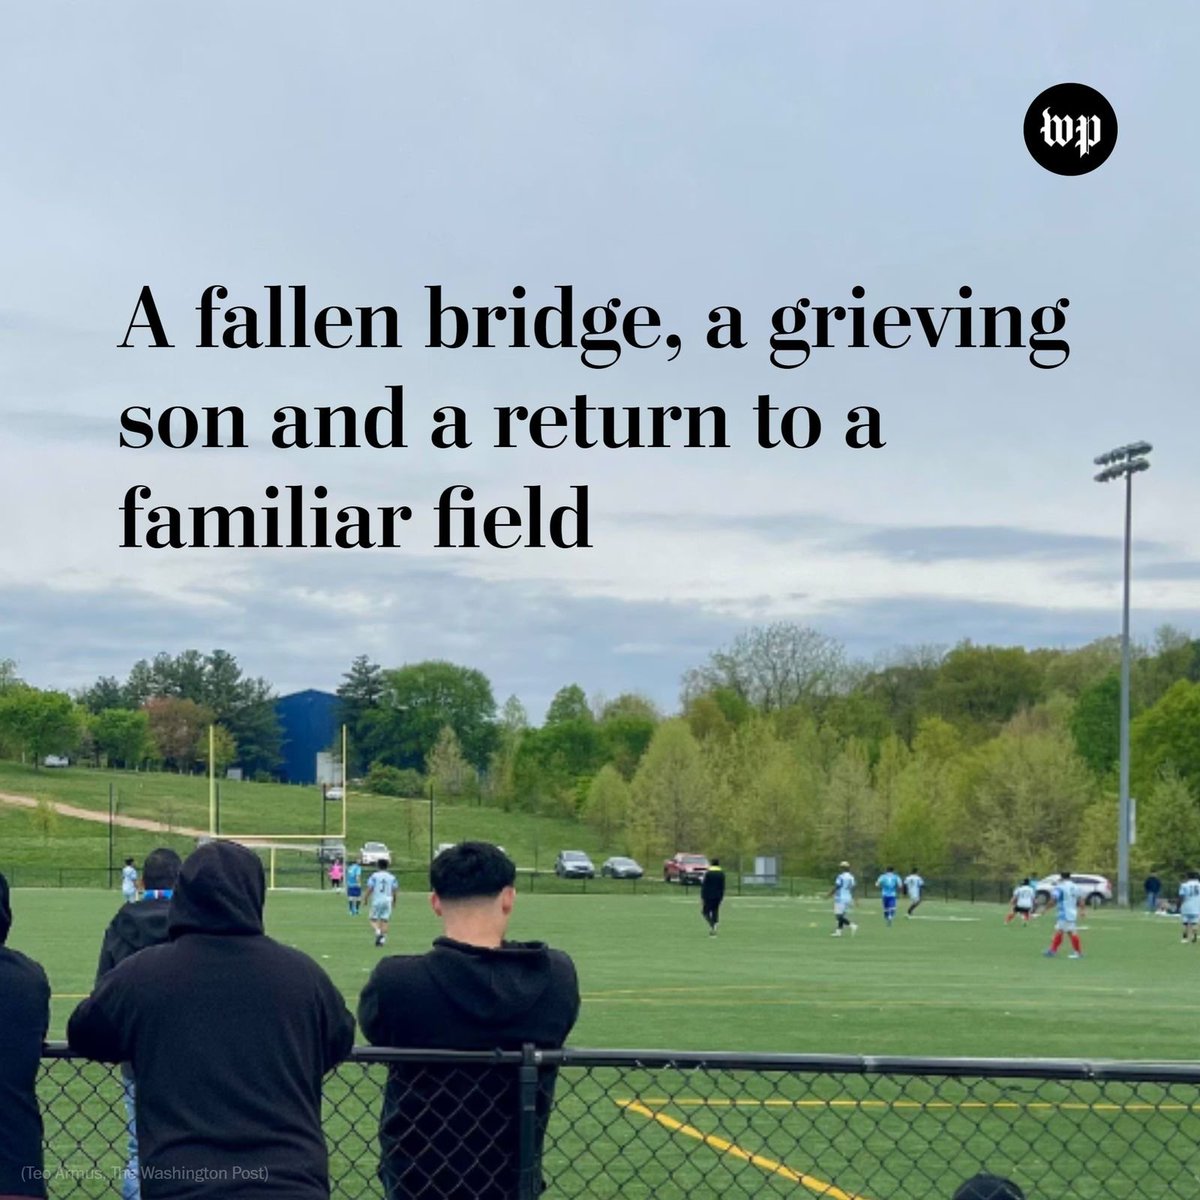 Once a semipro soccer player back in El Salvador, Miguel Luna spent many weekends coaching his son in Maryland. Now, the soccer field was home to a tournament in his honor: the father of three fell to his death after a shipping container hit the Key Bridge, causing it to